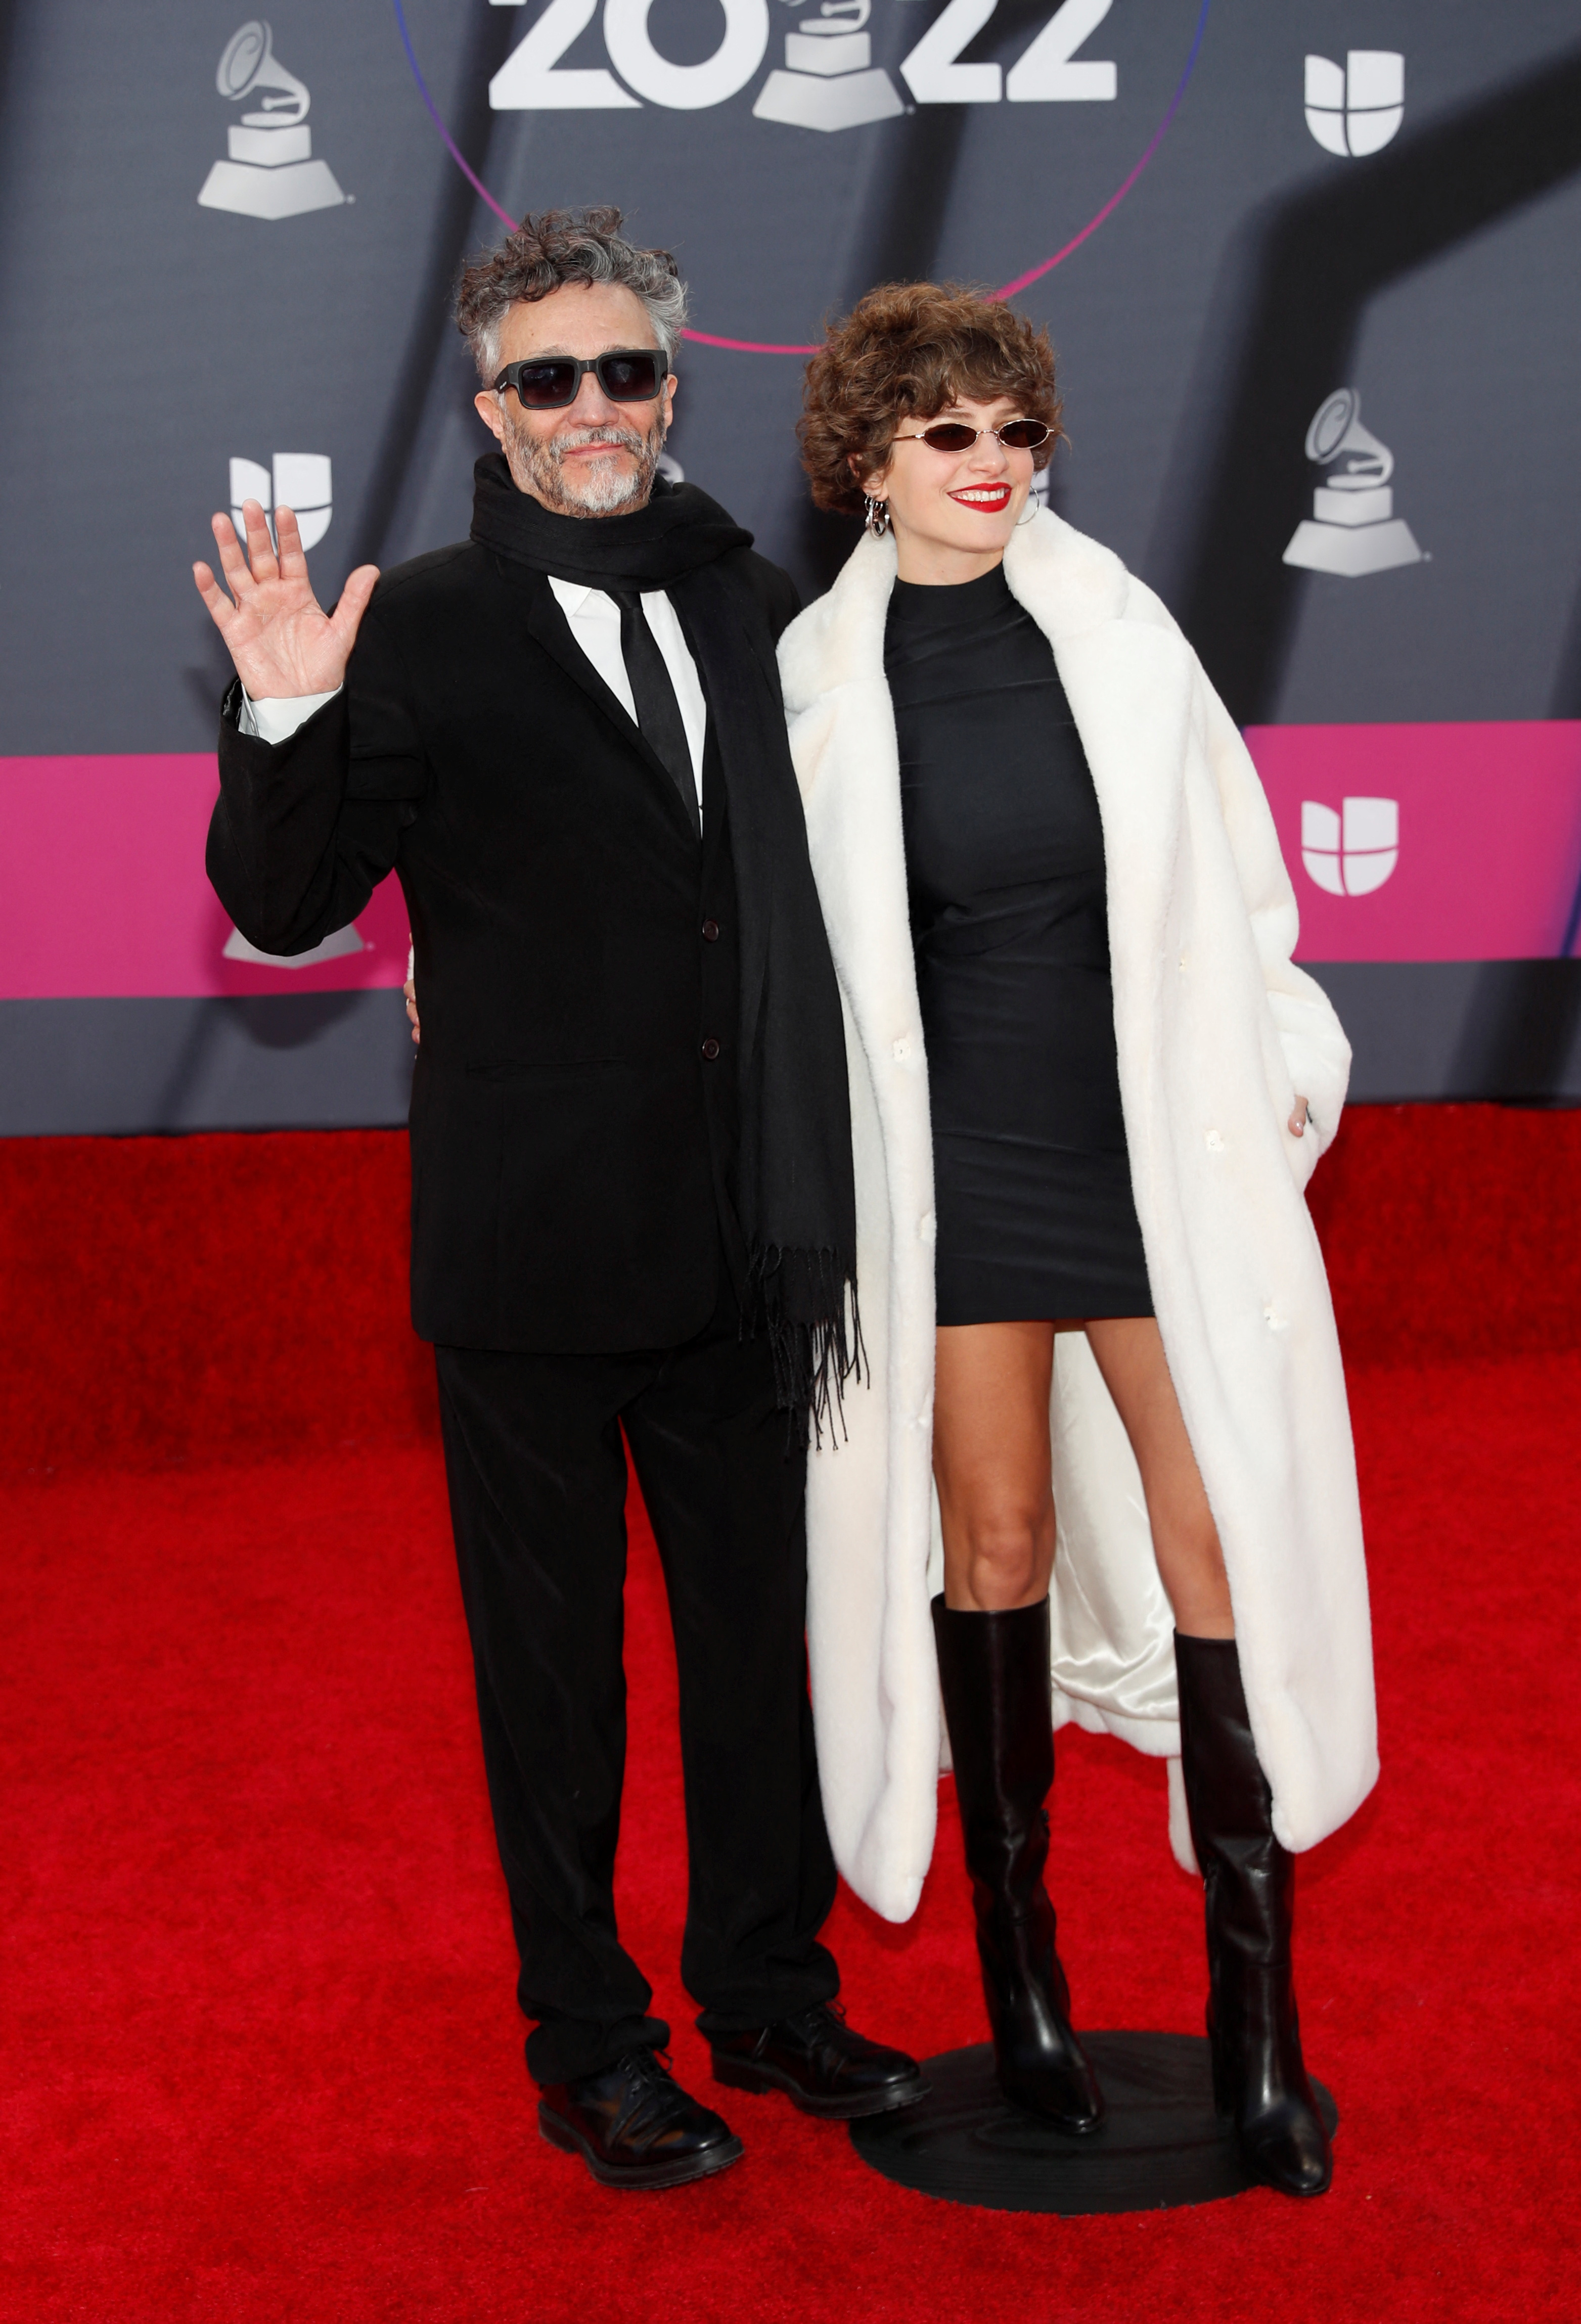 Fito Páez and Eugenia Kolodziej on the red carpet of the Grammys (REUTERS / Steve Marcus)